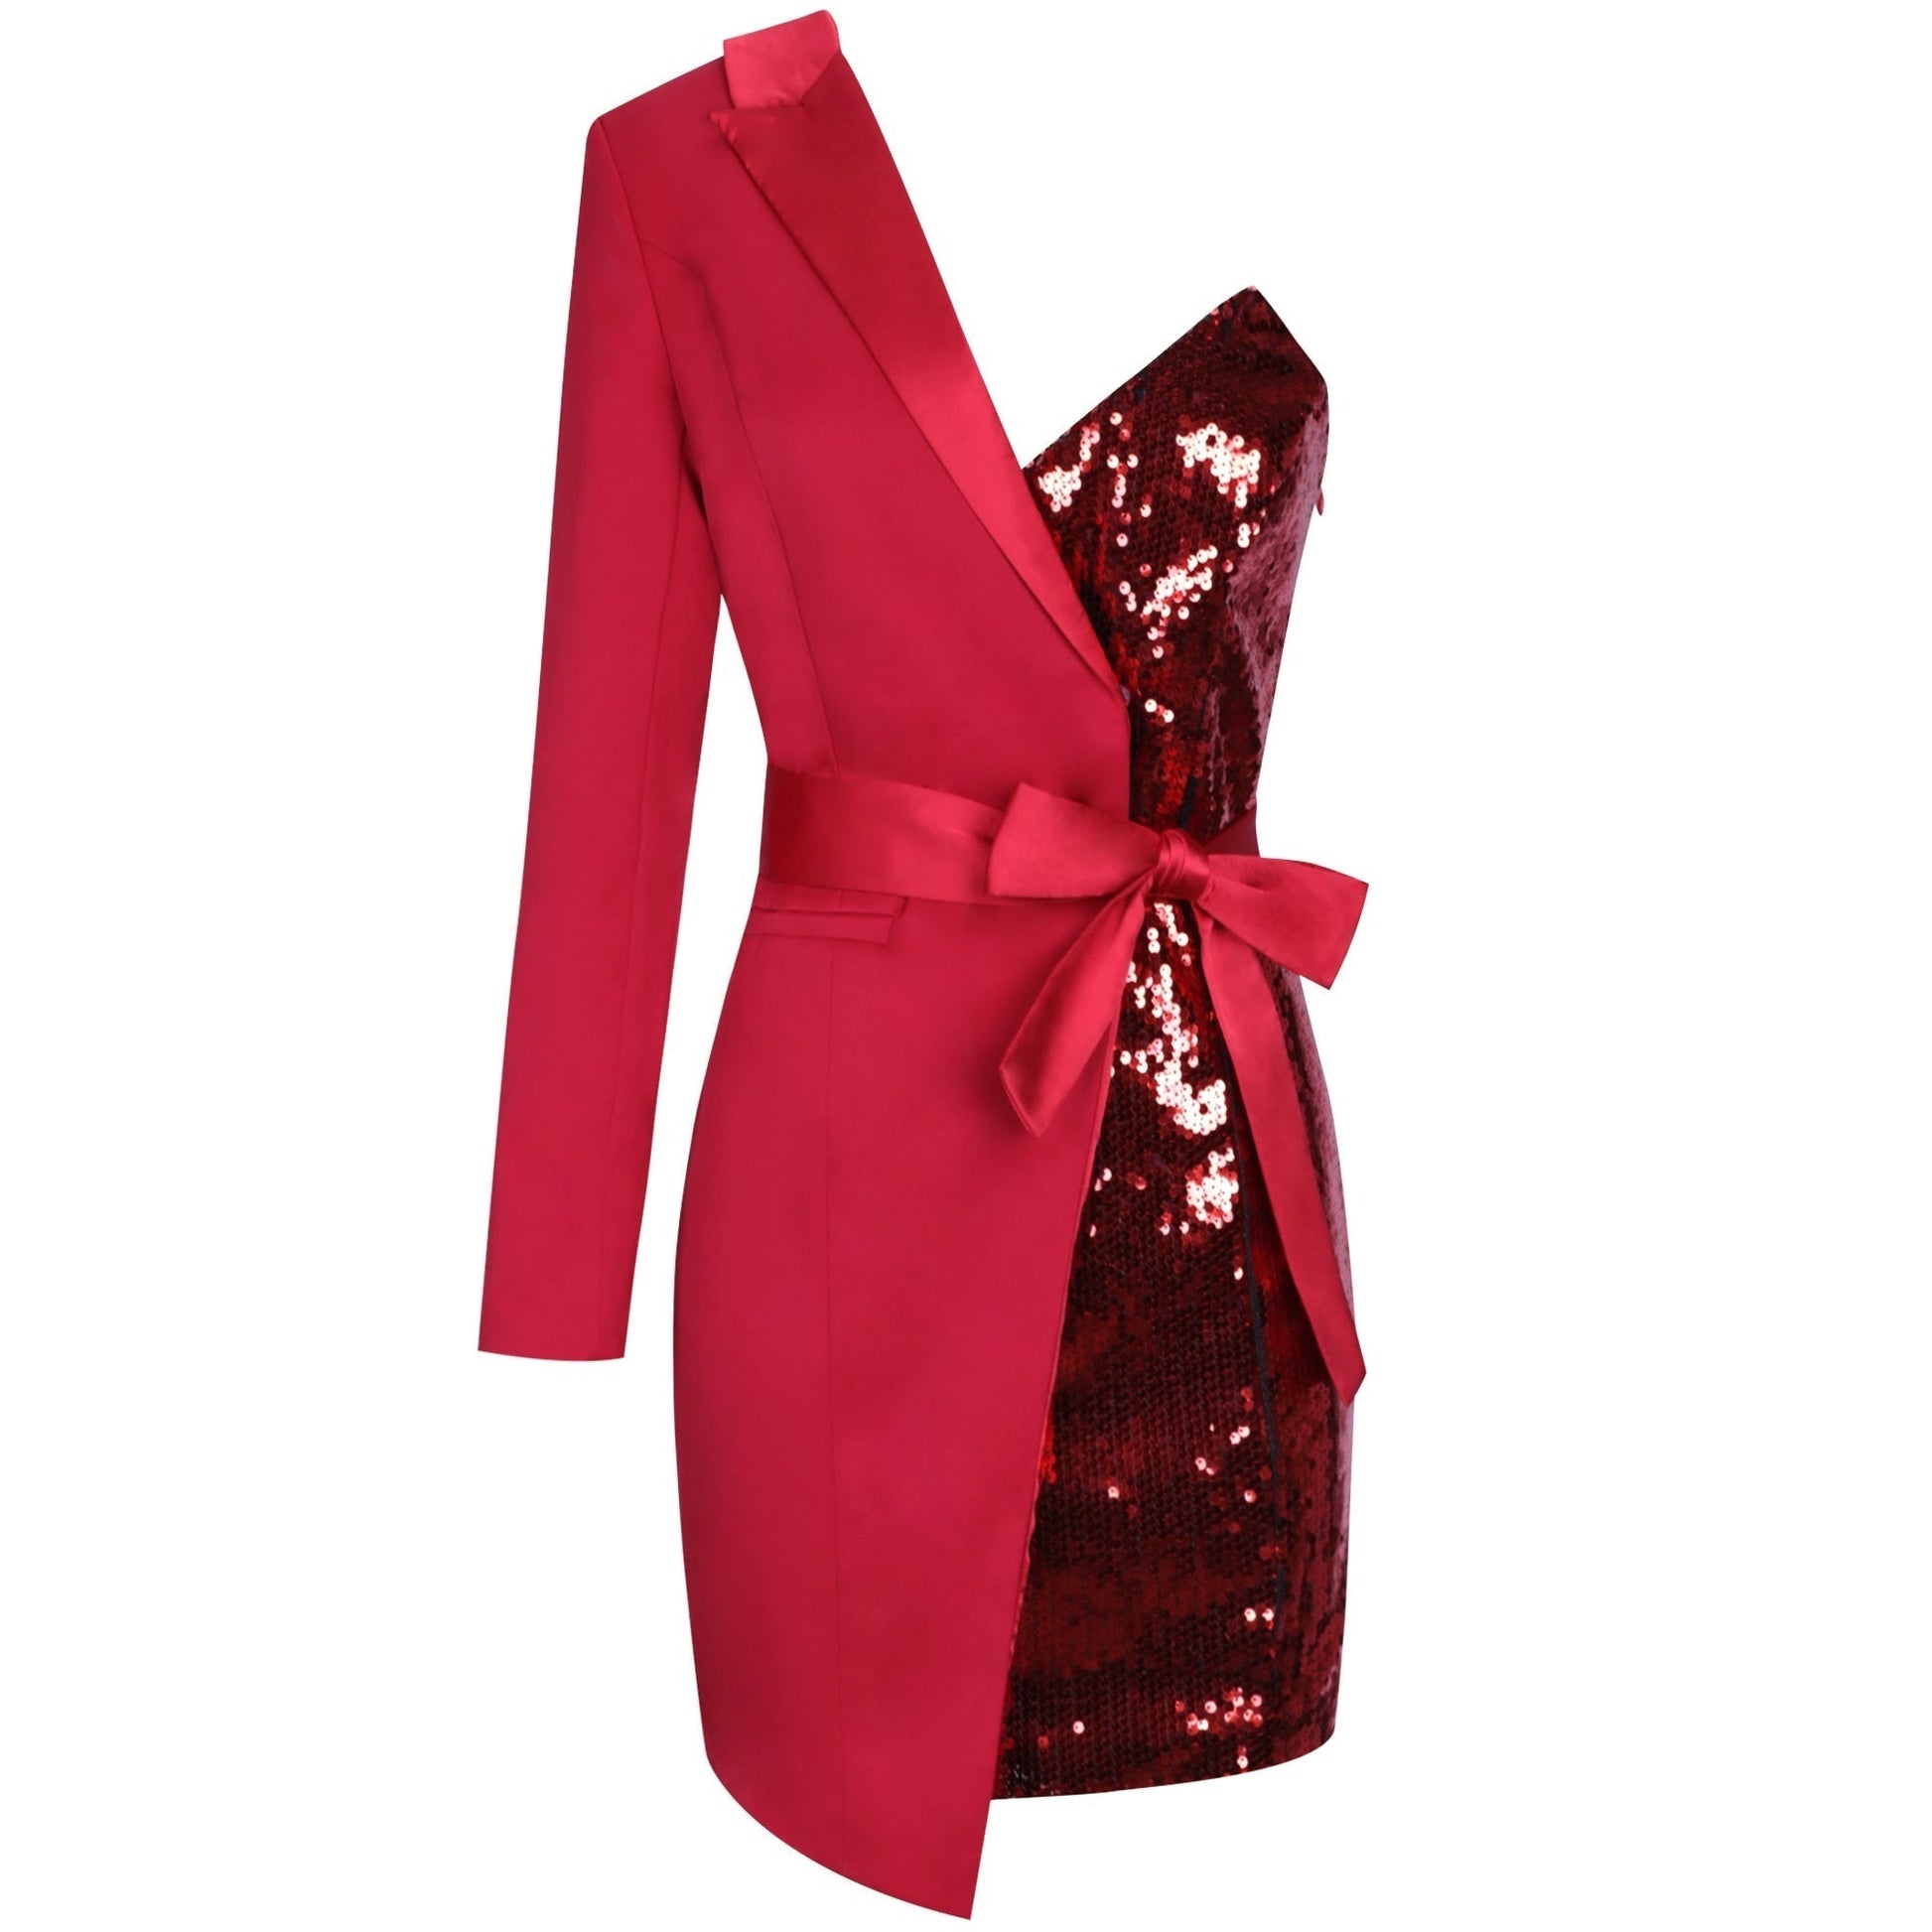 The One And Only Blazer Dress Fashion Closet Clothing